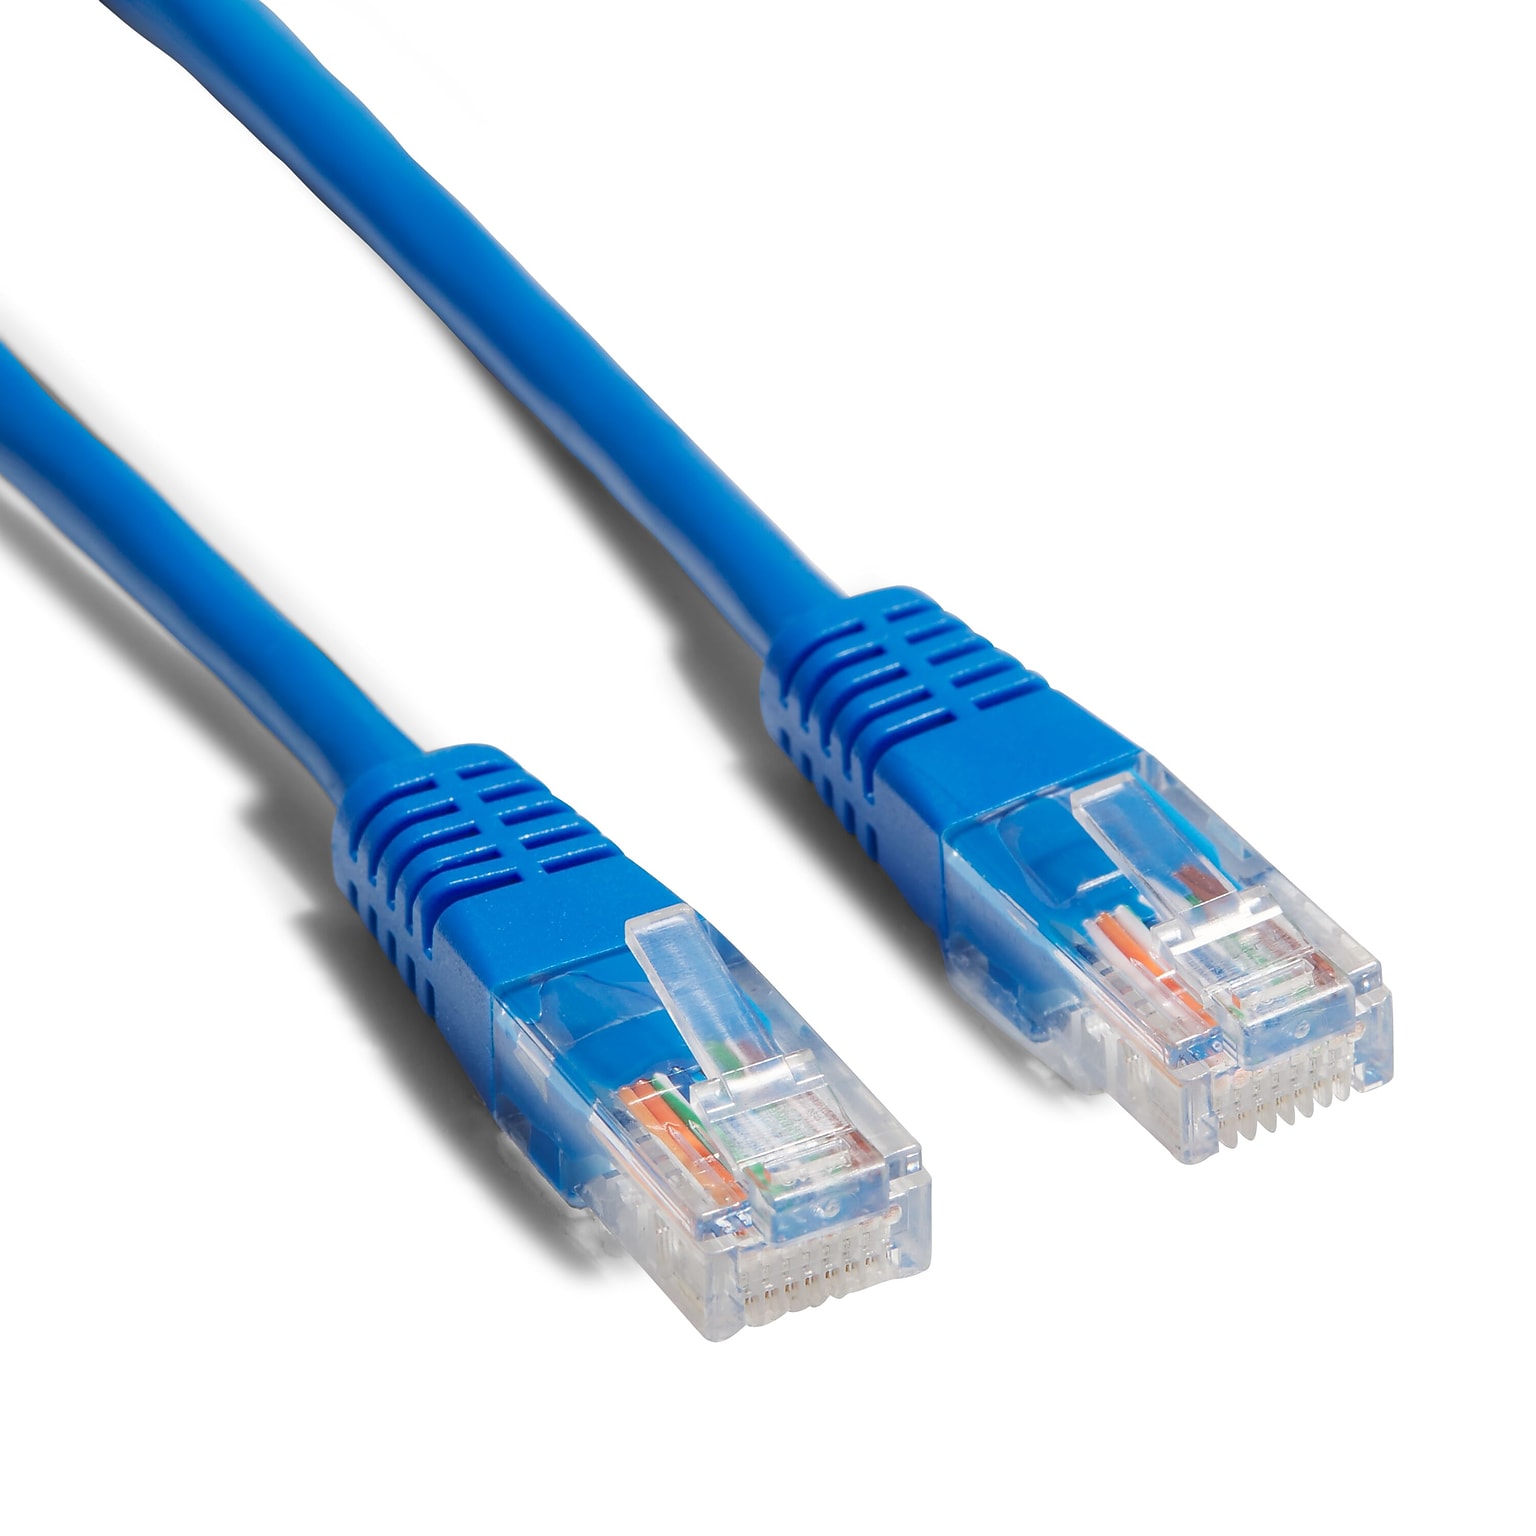 NXT Technologies™ NX29775 50 CAT-5e Cable, Blue (NX29775)